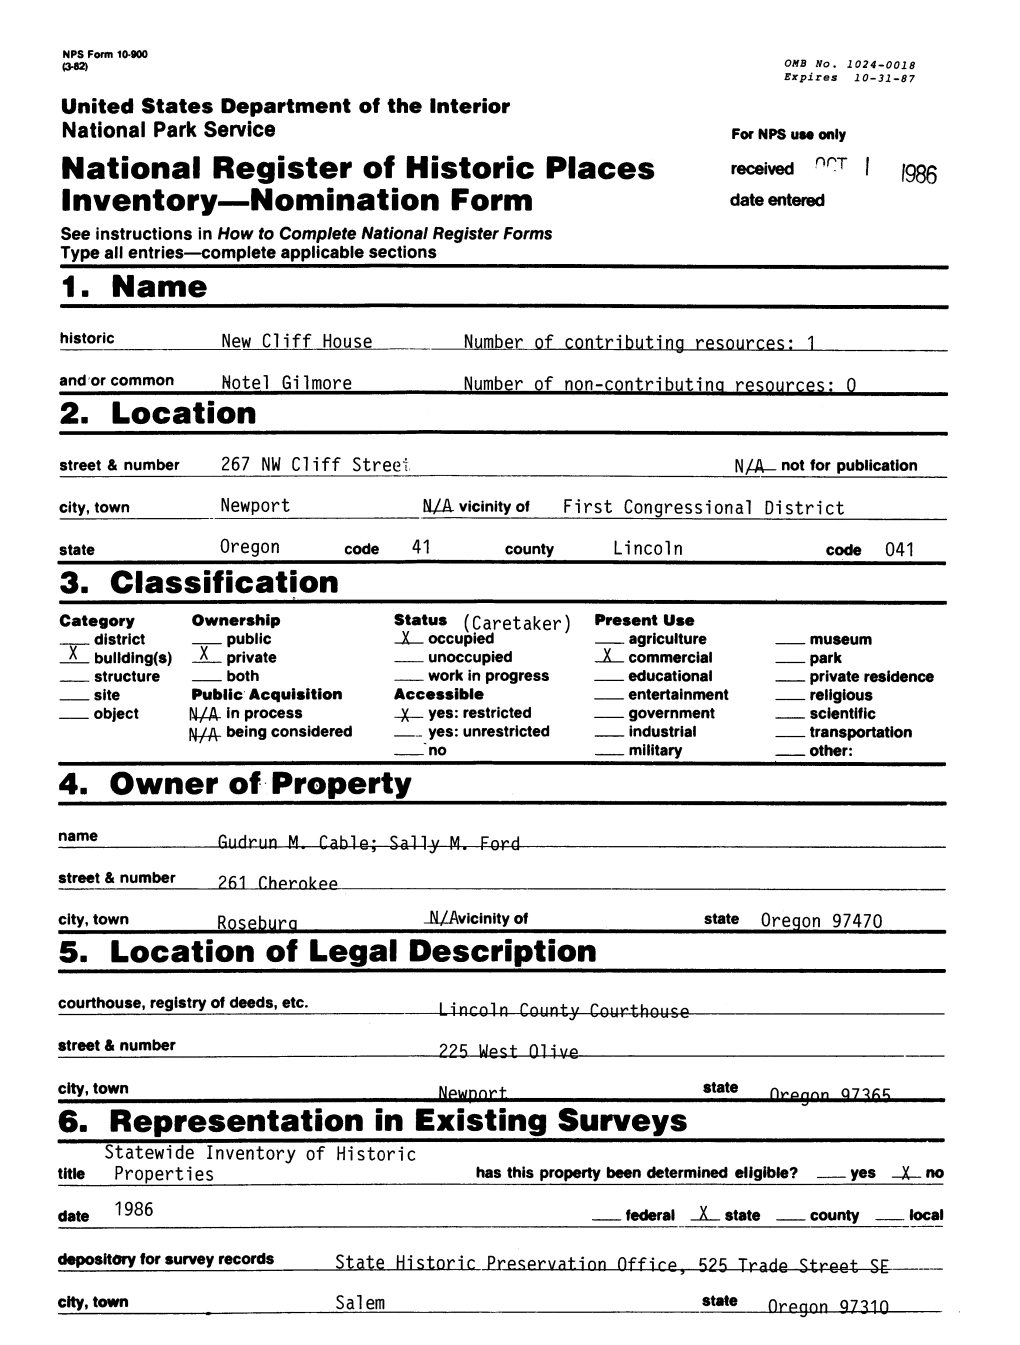 3. Classification 4. Owner Off Property